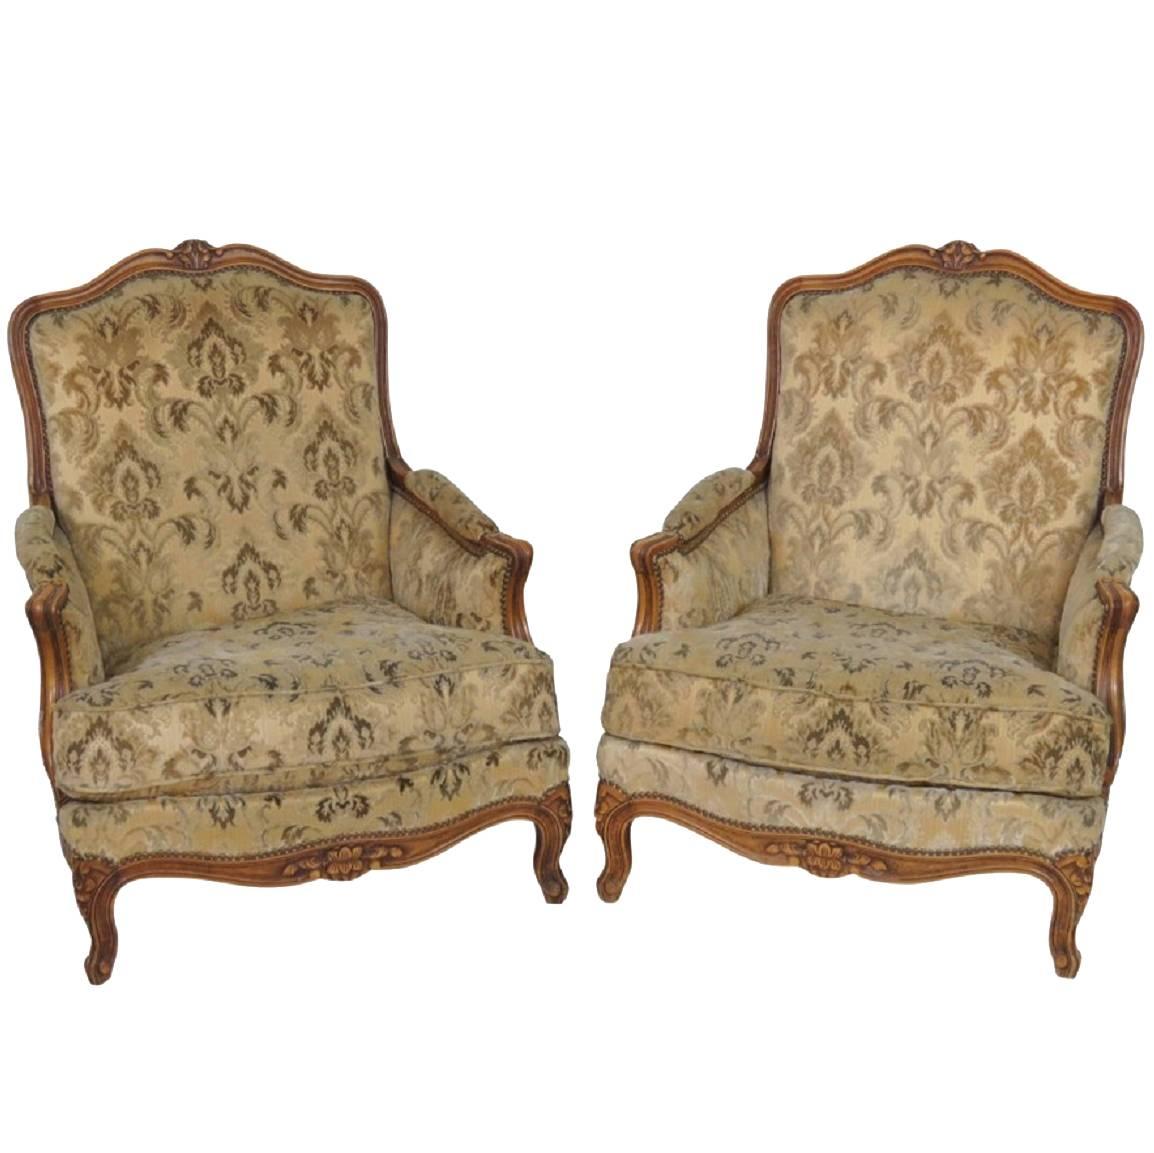 Pair of Antique French Carved Bergeres